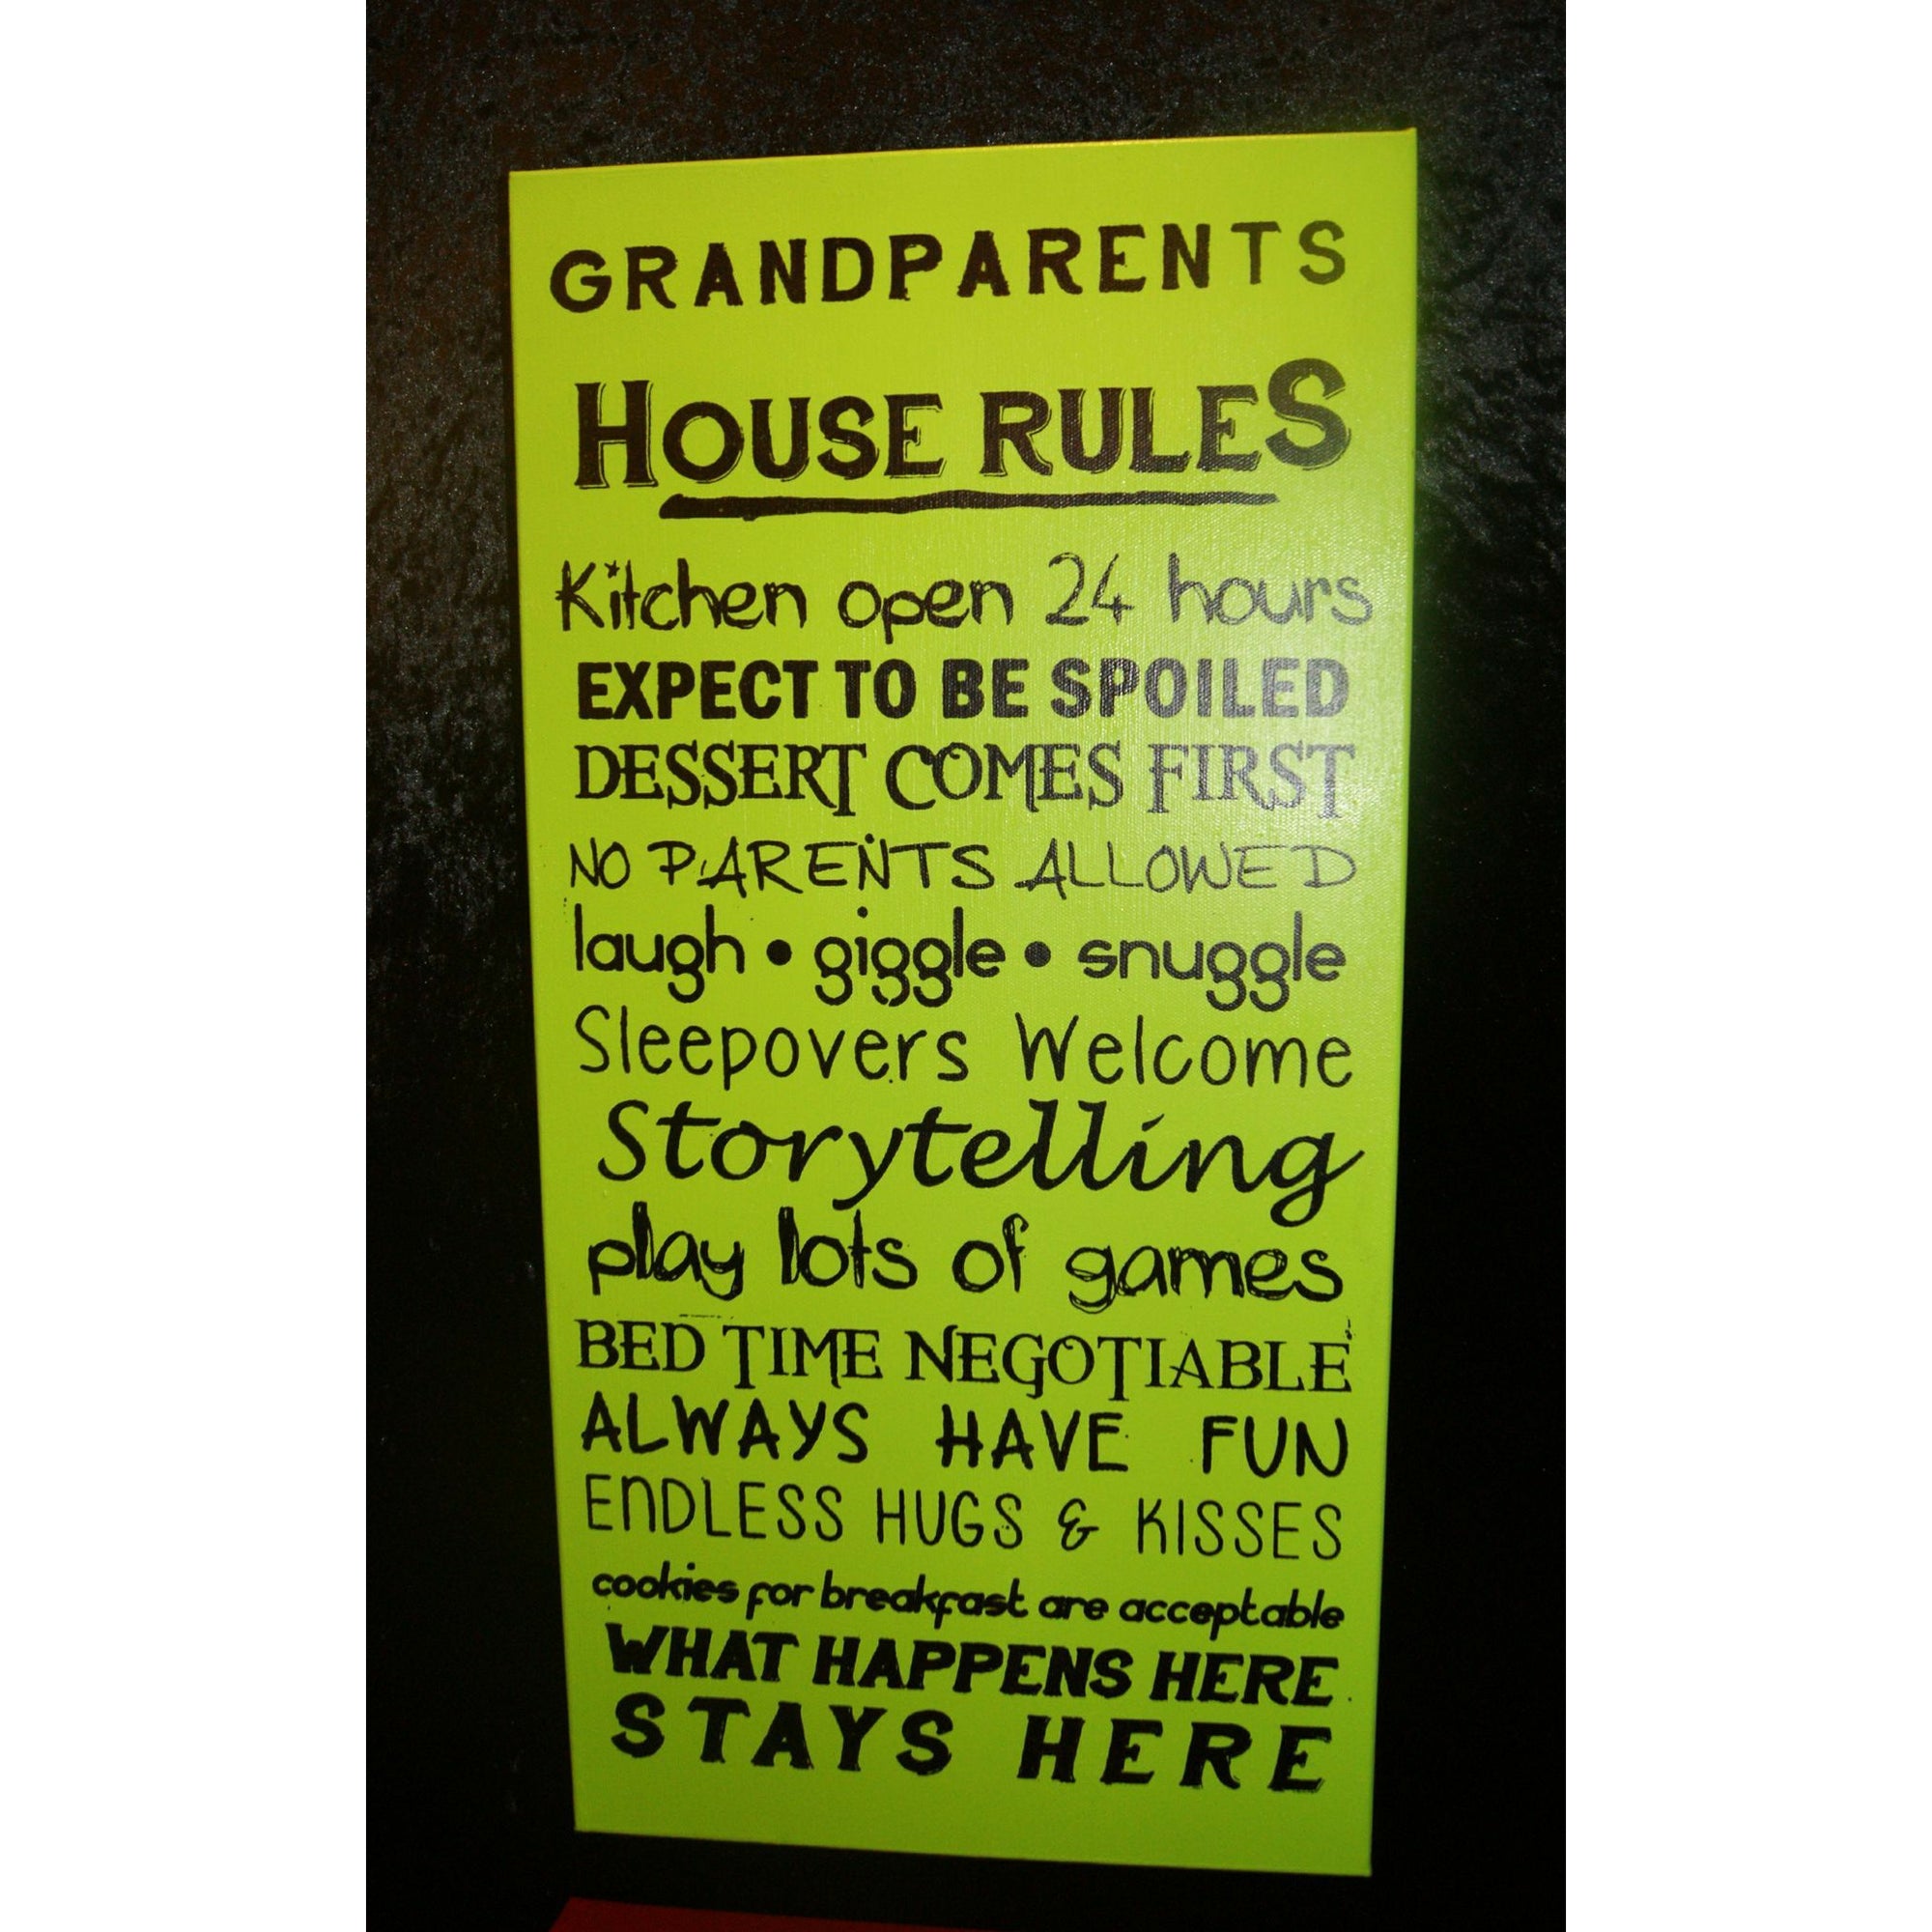 Grandparents House Rules Nufin Fitz